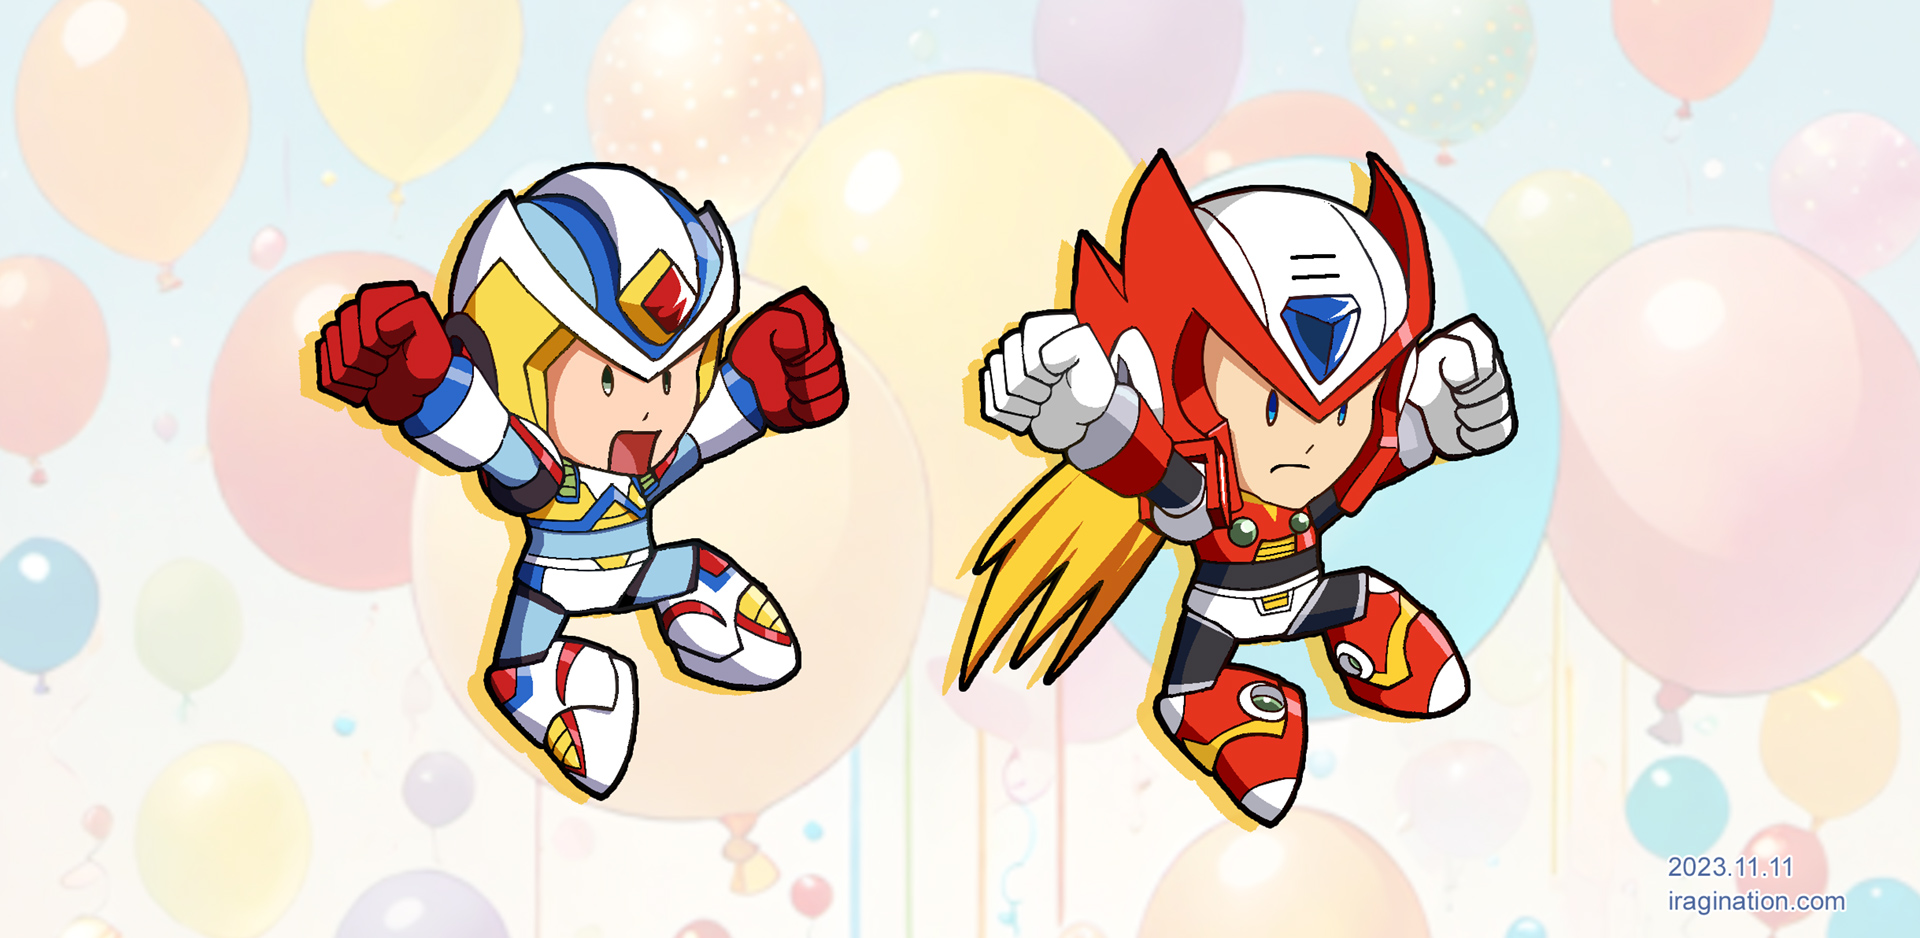 SD Second Armor X and SD Zero
Artwork used on a [url=https://www.iragination.com/illust/displayimage.php?pid=603]previous post[/url].

Mega Man X DiVE © CAPCOM

[b]References[/b]
- [url=https://youtu.be/6t_zhk5h-fU]SD Second Armor X[/url]
- [url=https://youtu.be/Yisd3aWbgfc]SD Zero [/url]
- Background assisted by [url=https://hotpot.ai/s/share/8/8-Bed79TVft8jwBLe]Hotpot AI[/url].

Keywords: x zero